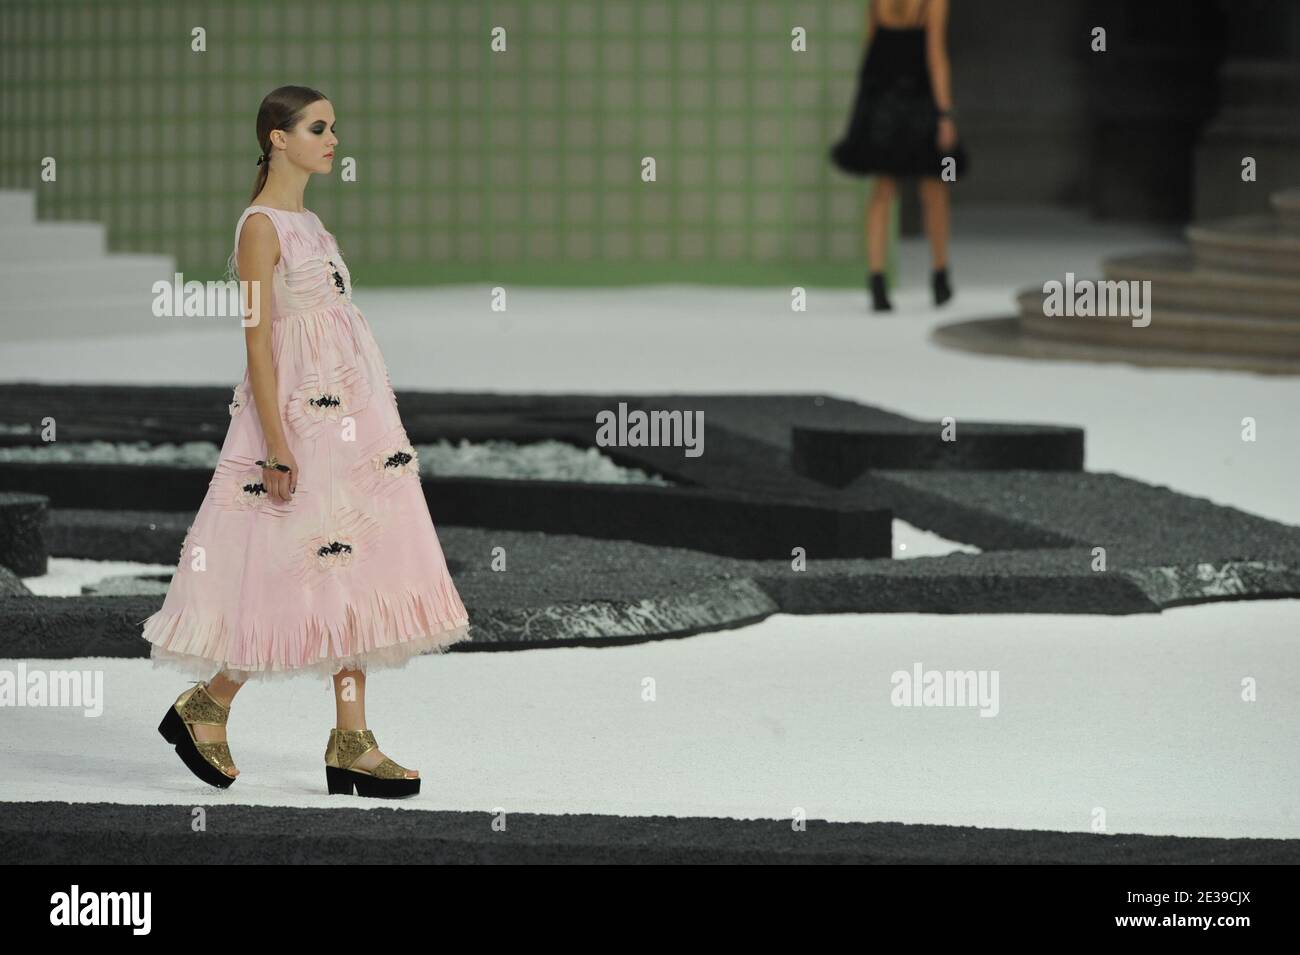 A model displays a creation by Karl Lagerfeld for Chanel spring-summer 2011  ready-to wear collection presentation held at the Grand Palais in Paris,  France on October 5, 2010. Photo by Thierry Orban/ABACAPRESS.COM